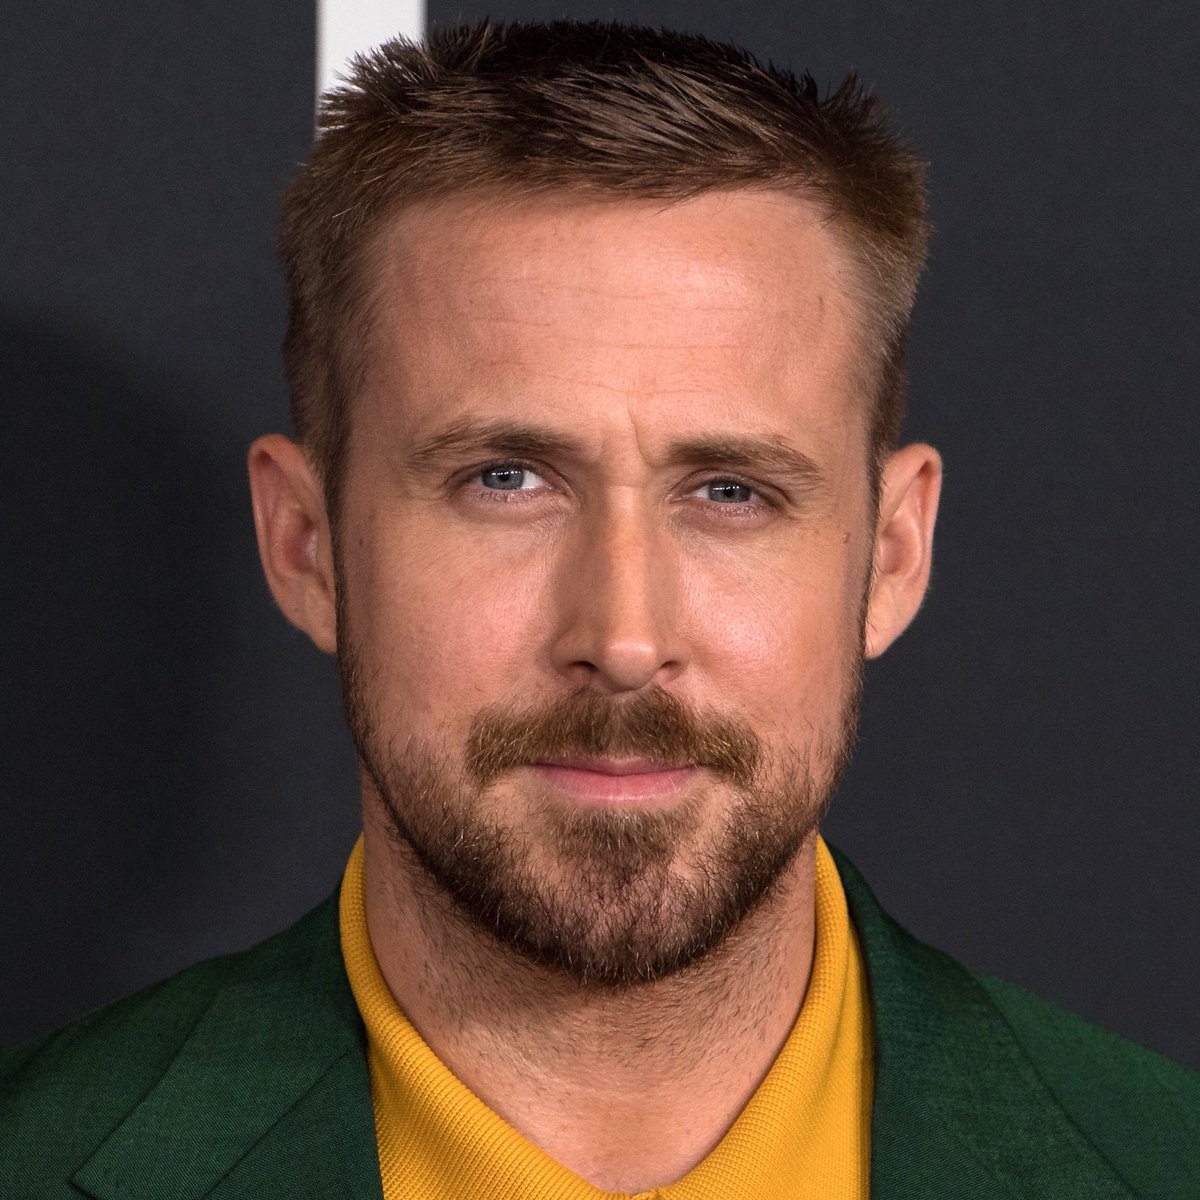 Ryan Gosling was set to star in Peter Jackson’s The Lovely Bones but after he gained 60 pounds because he thought the character should be overweight, he was fired and replaced with Mark Wahlberg, leaving him, in his own words, “fat and unemployed”.